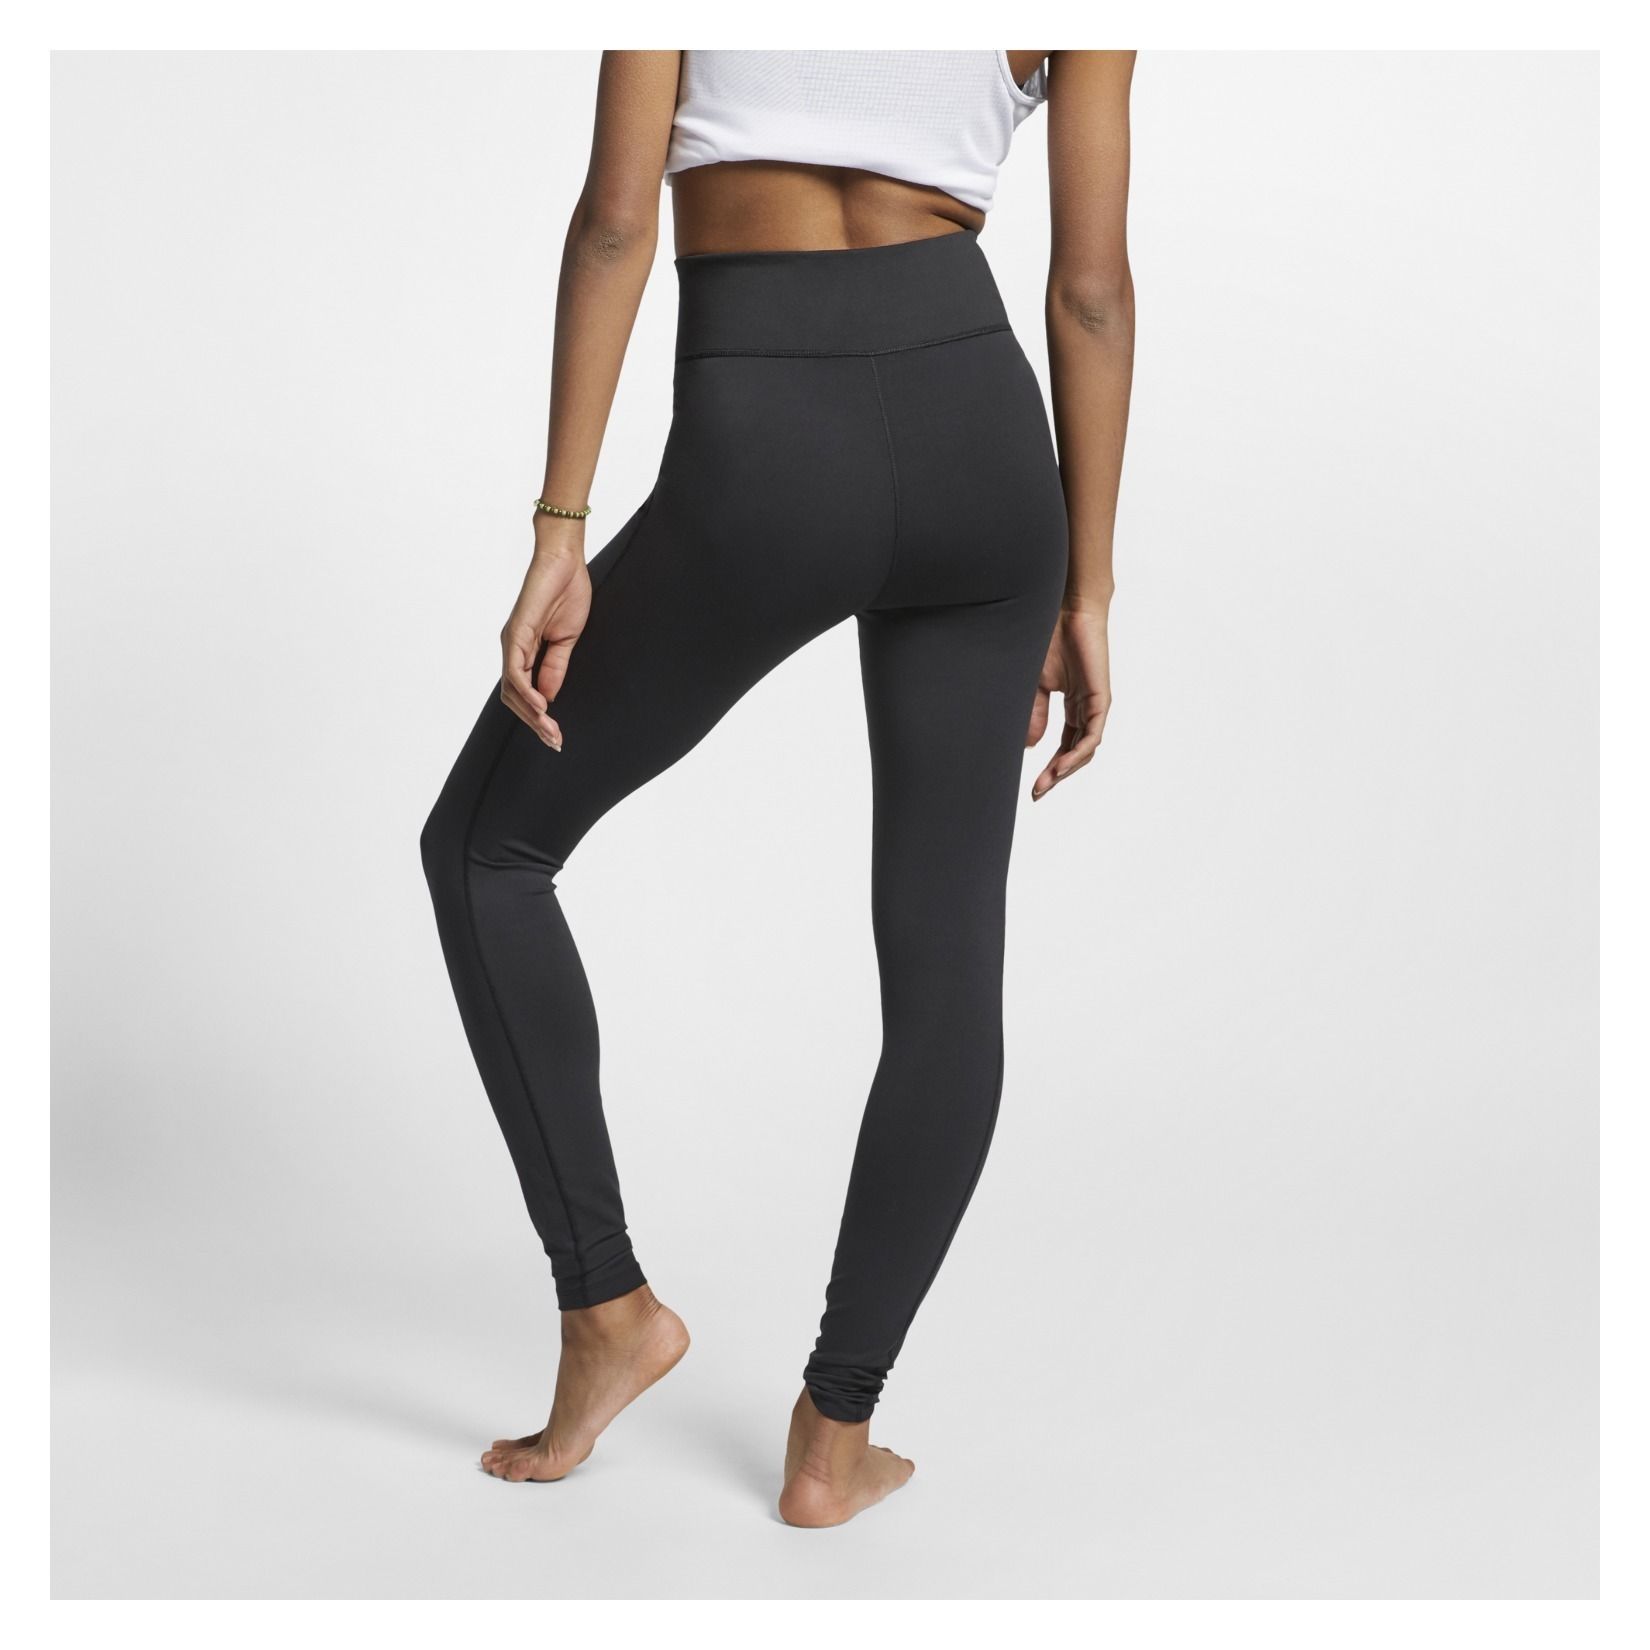 nike sculpt victory tights,pasteurinstituteindia.com